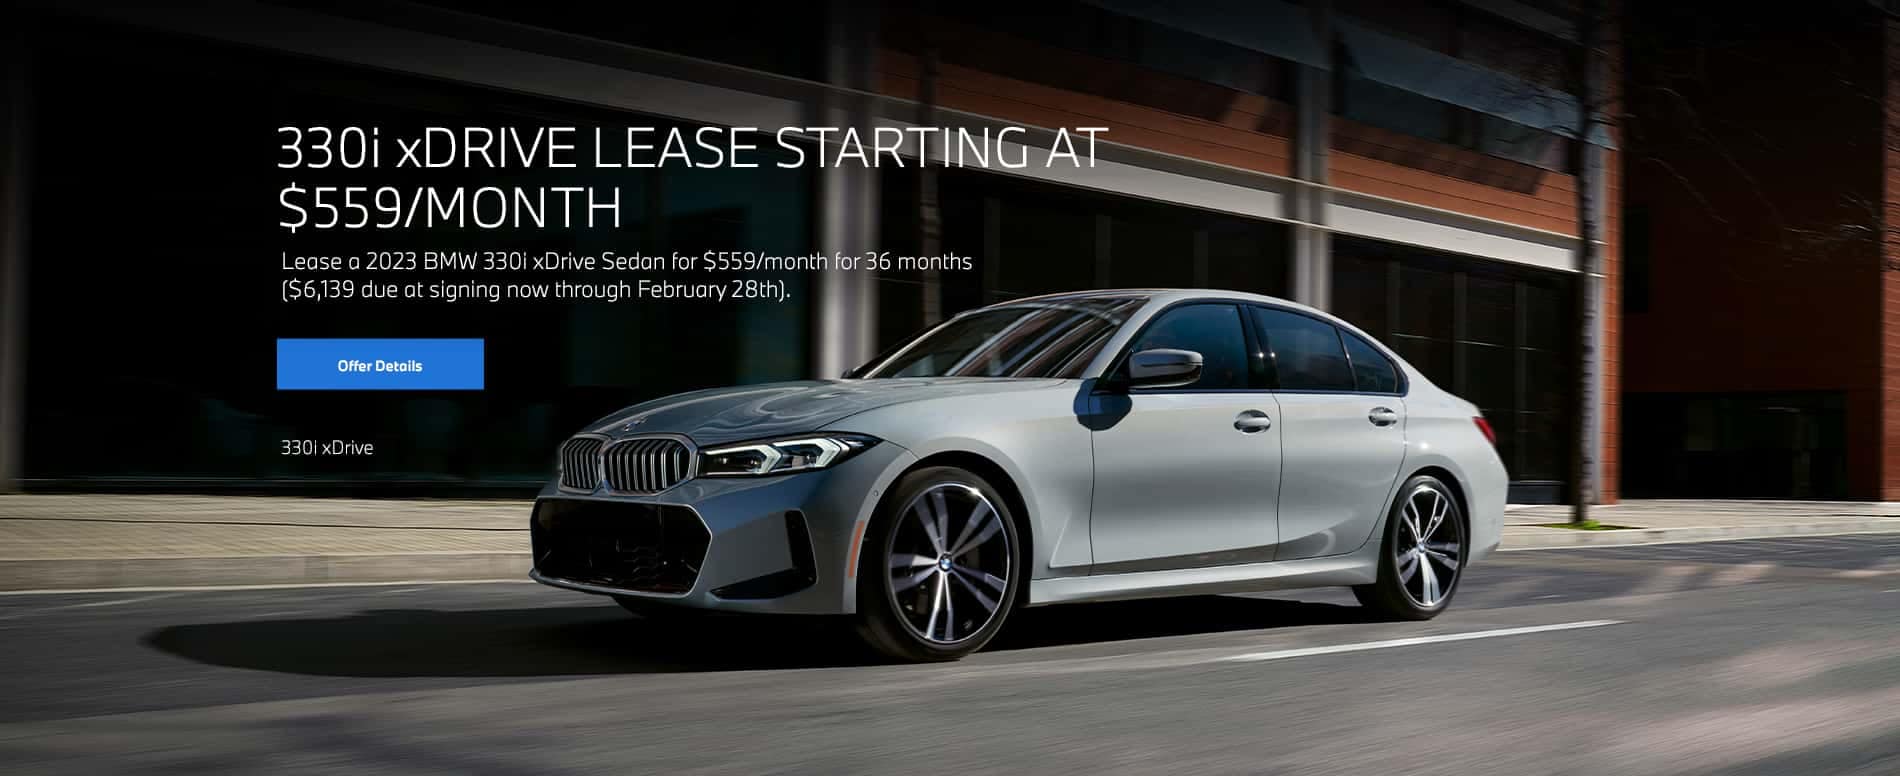 2023 330i xDrive Sedan lease starting at $559 per month for 36 months